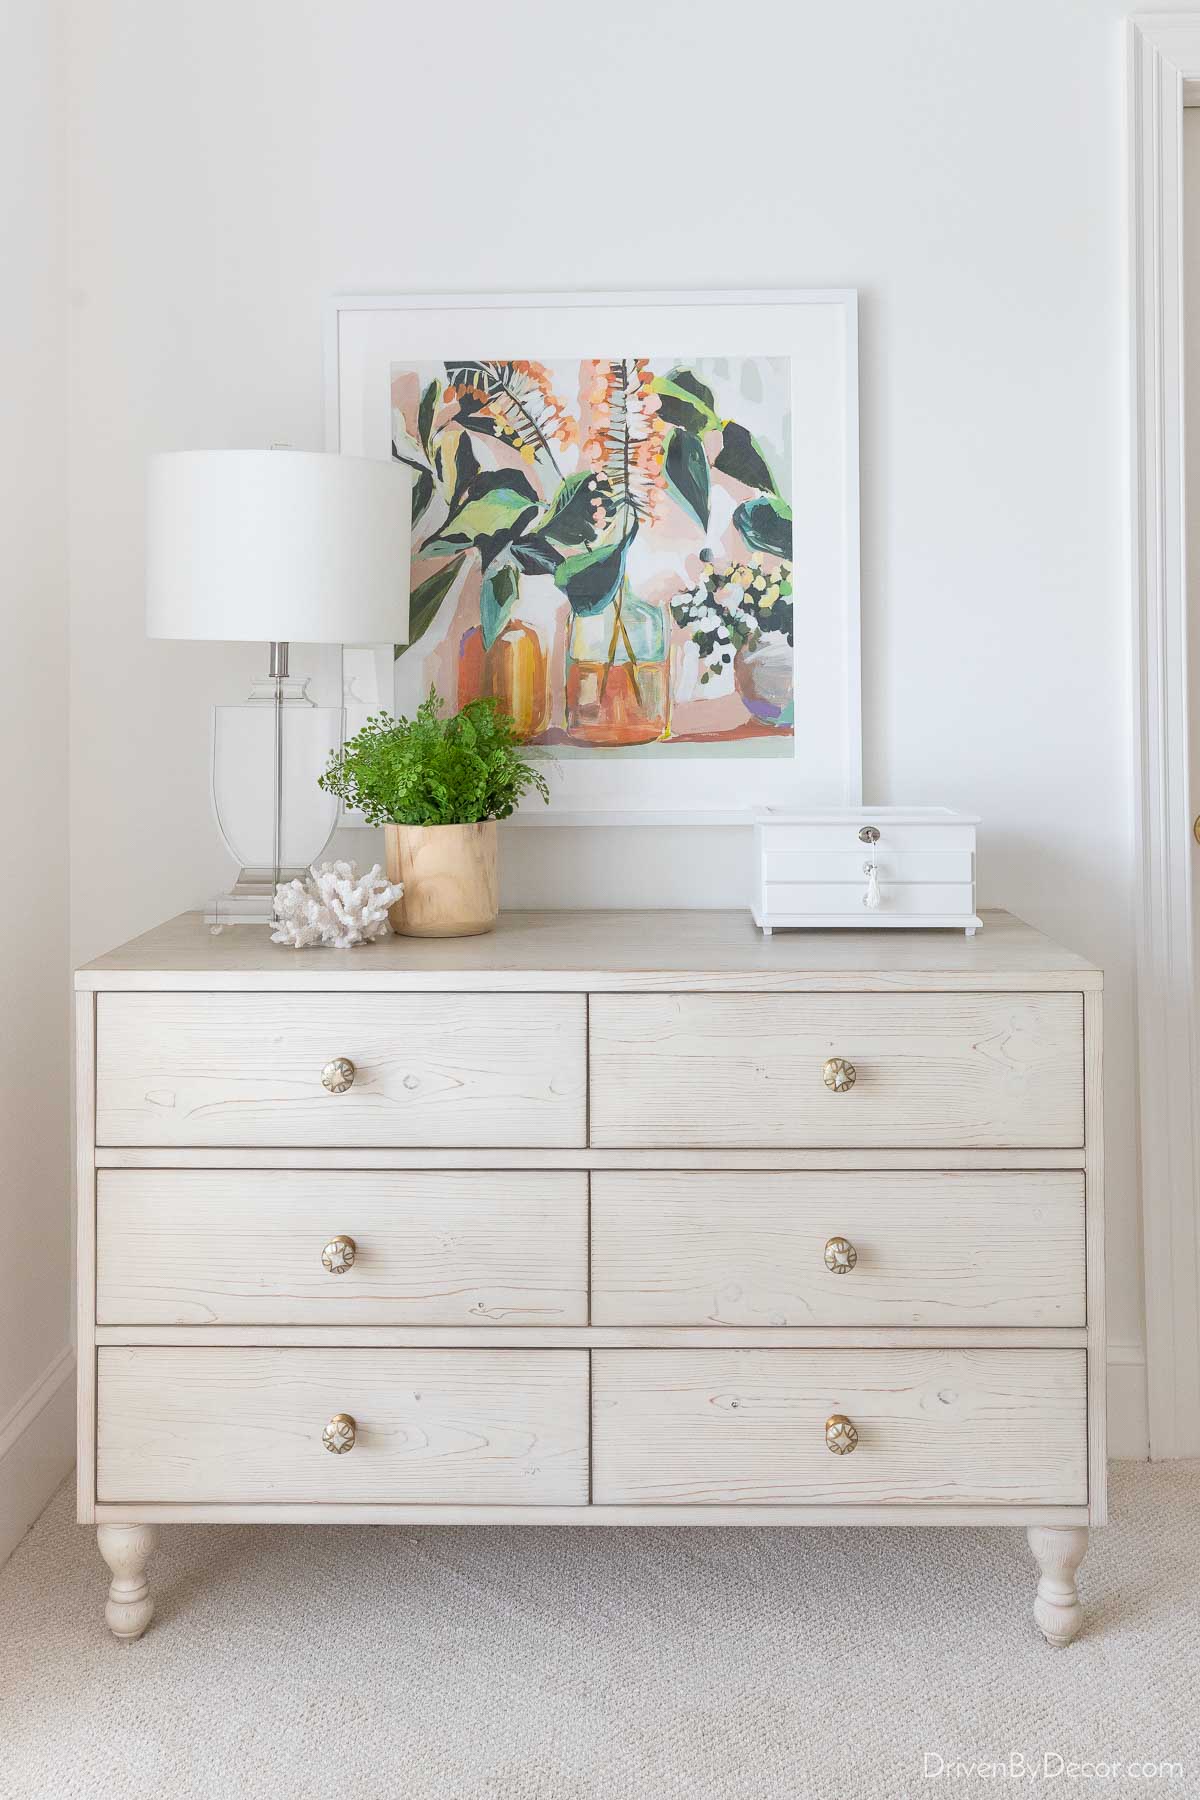 Floral picture hung over dresser to show how high you should hang art over furniture